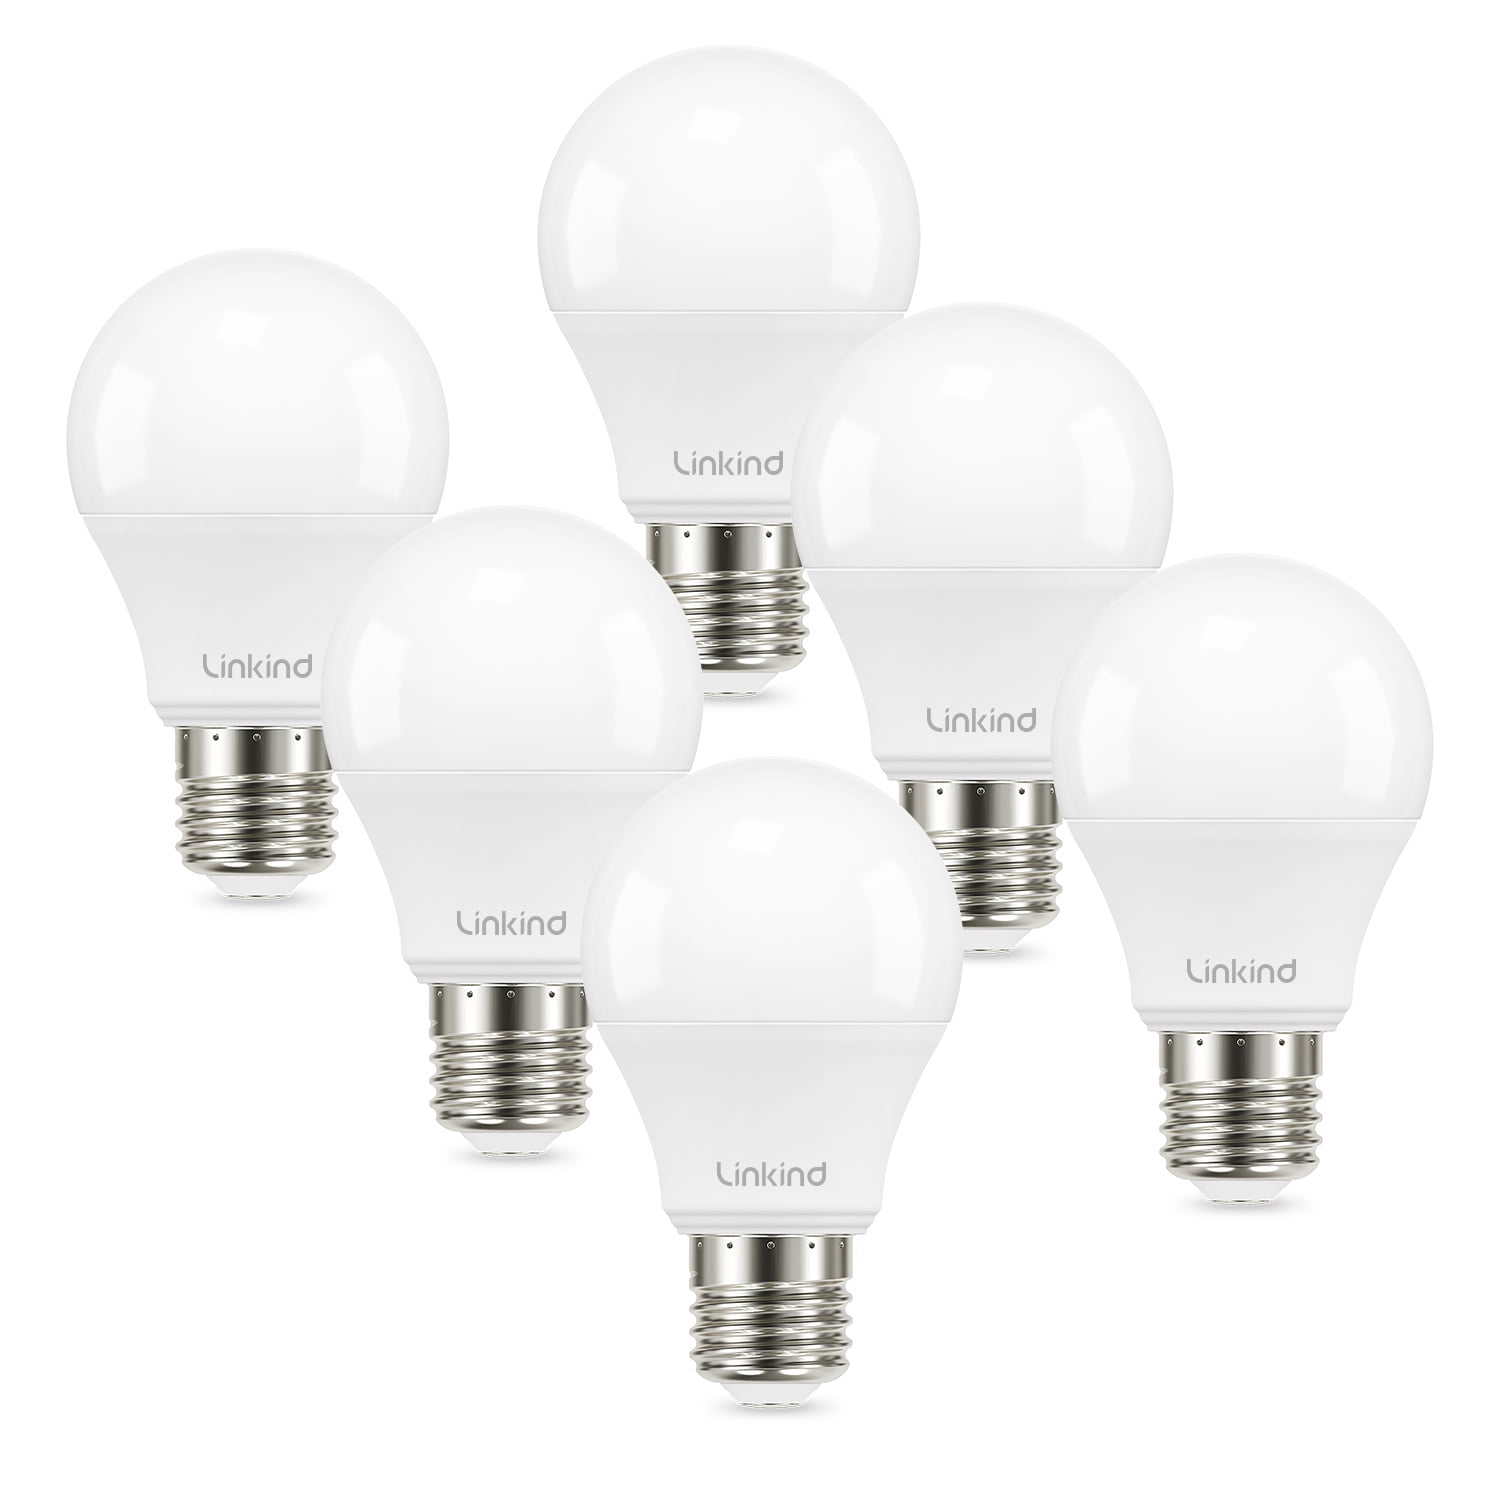 E14 Led Bulbs, 7W (Equivalent To 70W), Cool White (6000K), Ac220-240V,  Flicker Free, Non Dimmable, 700 Lumens, Cri>80, Pack Of 4 - (Cool White,  7W) 